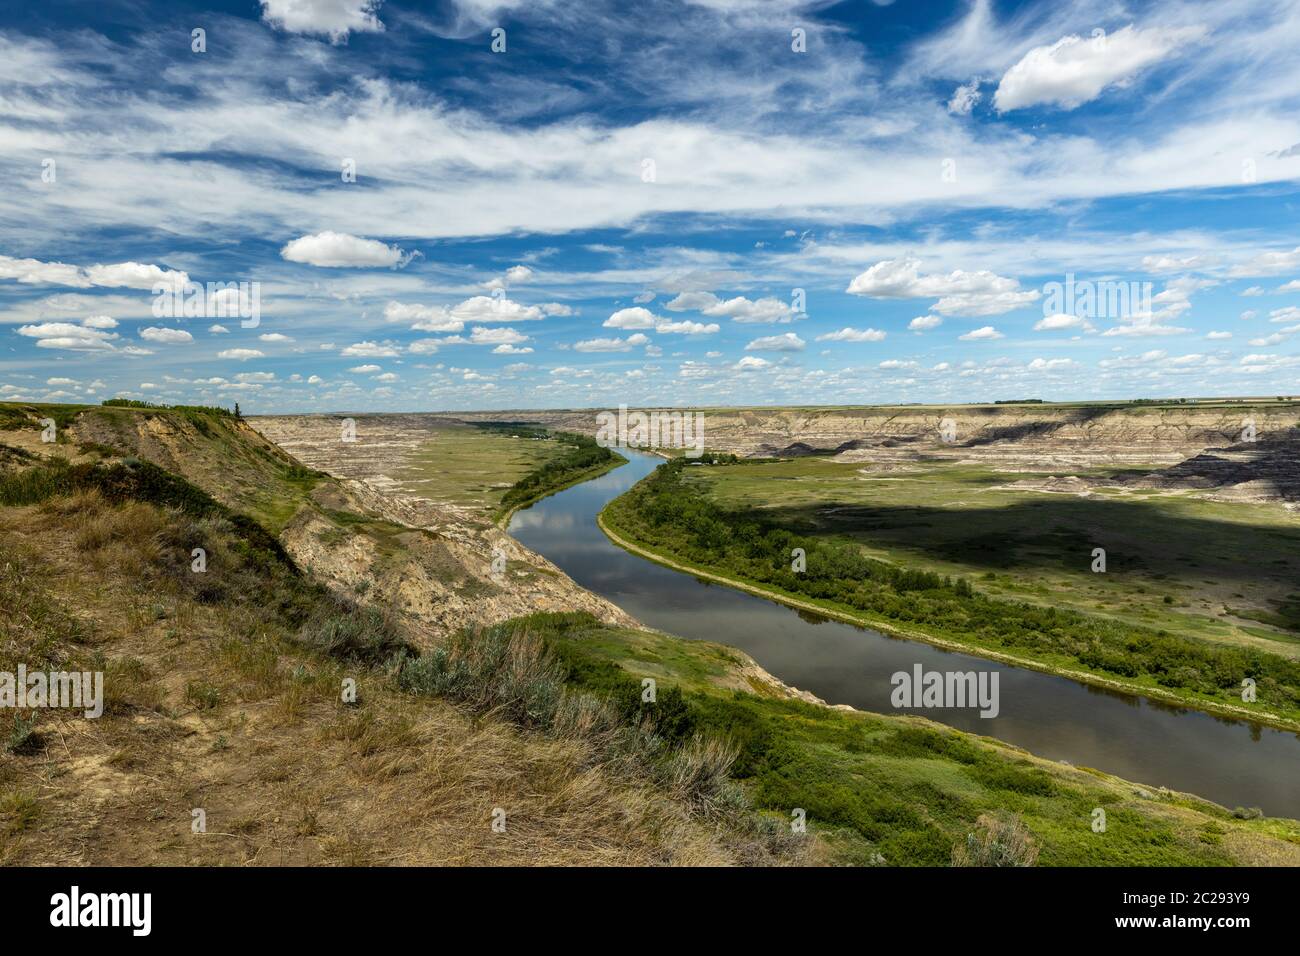 The Red Deer River Valley at Drumheller in Alberta Canada Stock Photo -  Alamy